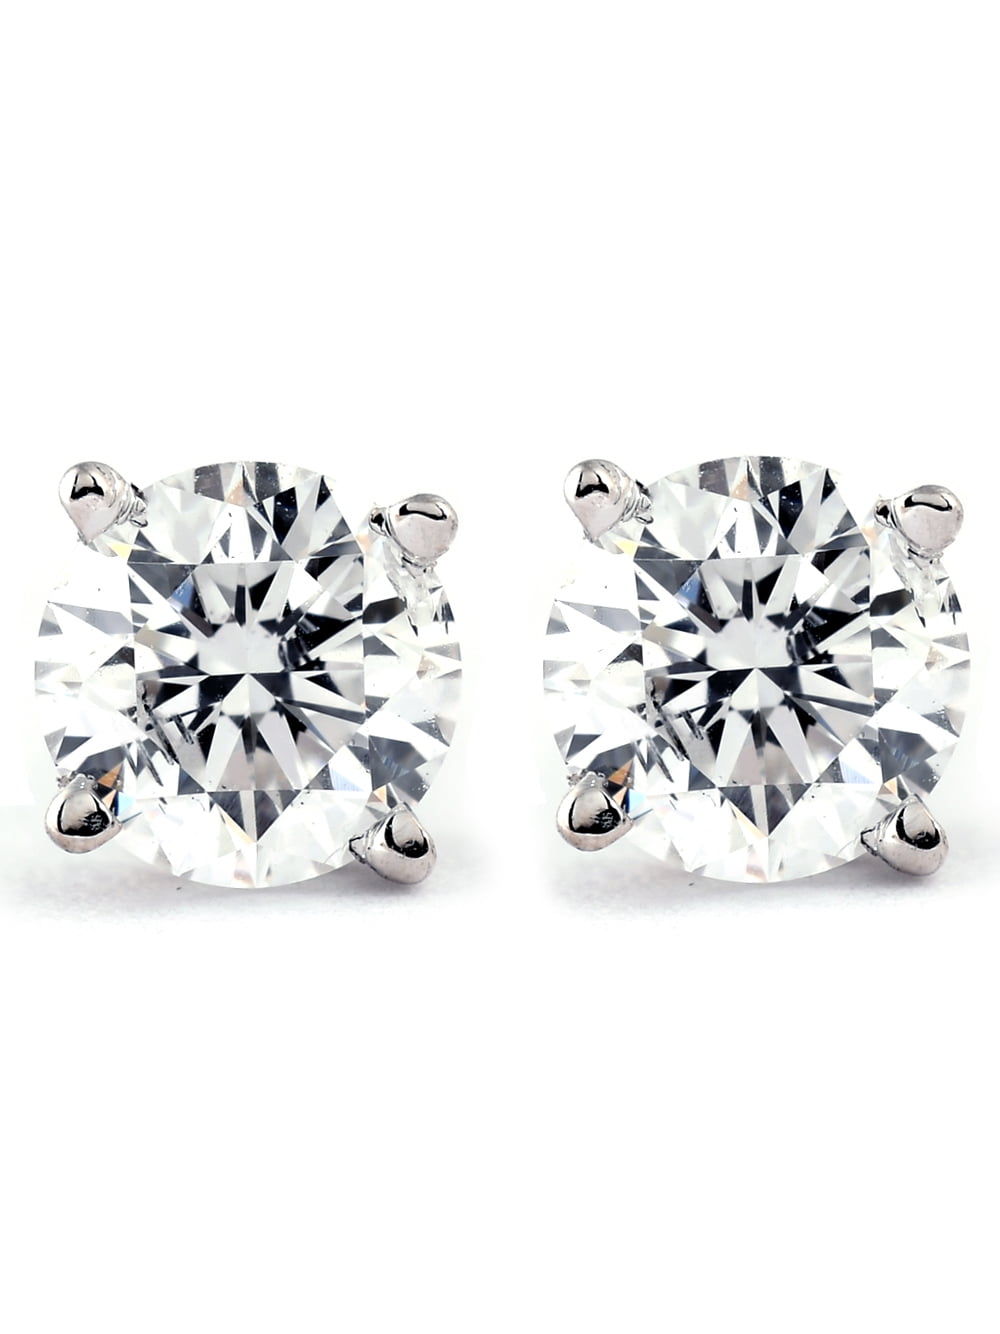 4 Stud Earrings Outlet Store, UP TO 60% OFF | www.loop-cn.com